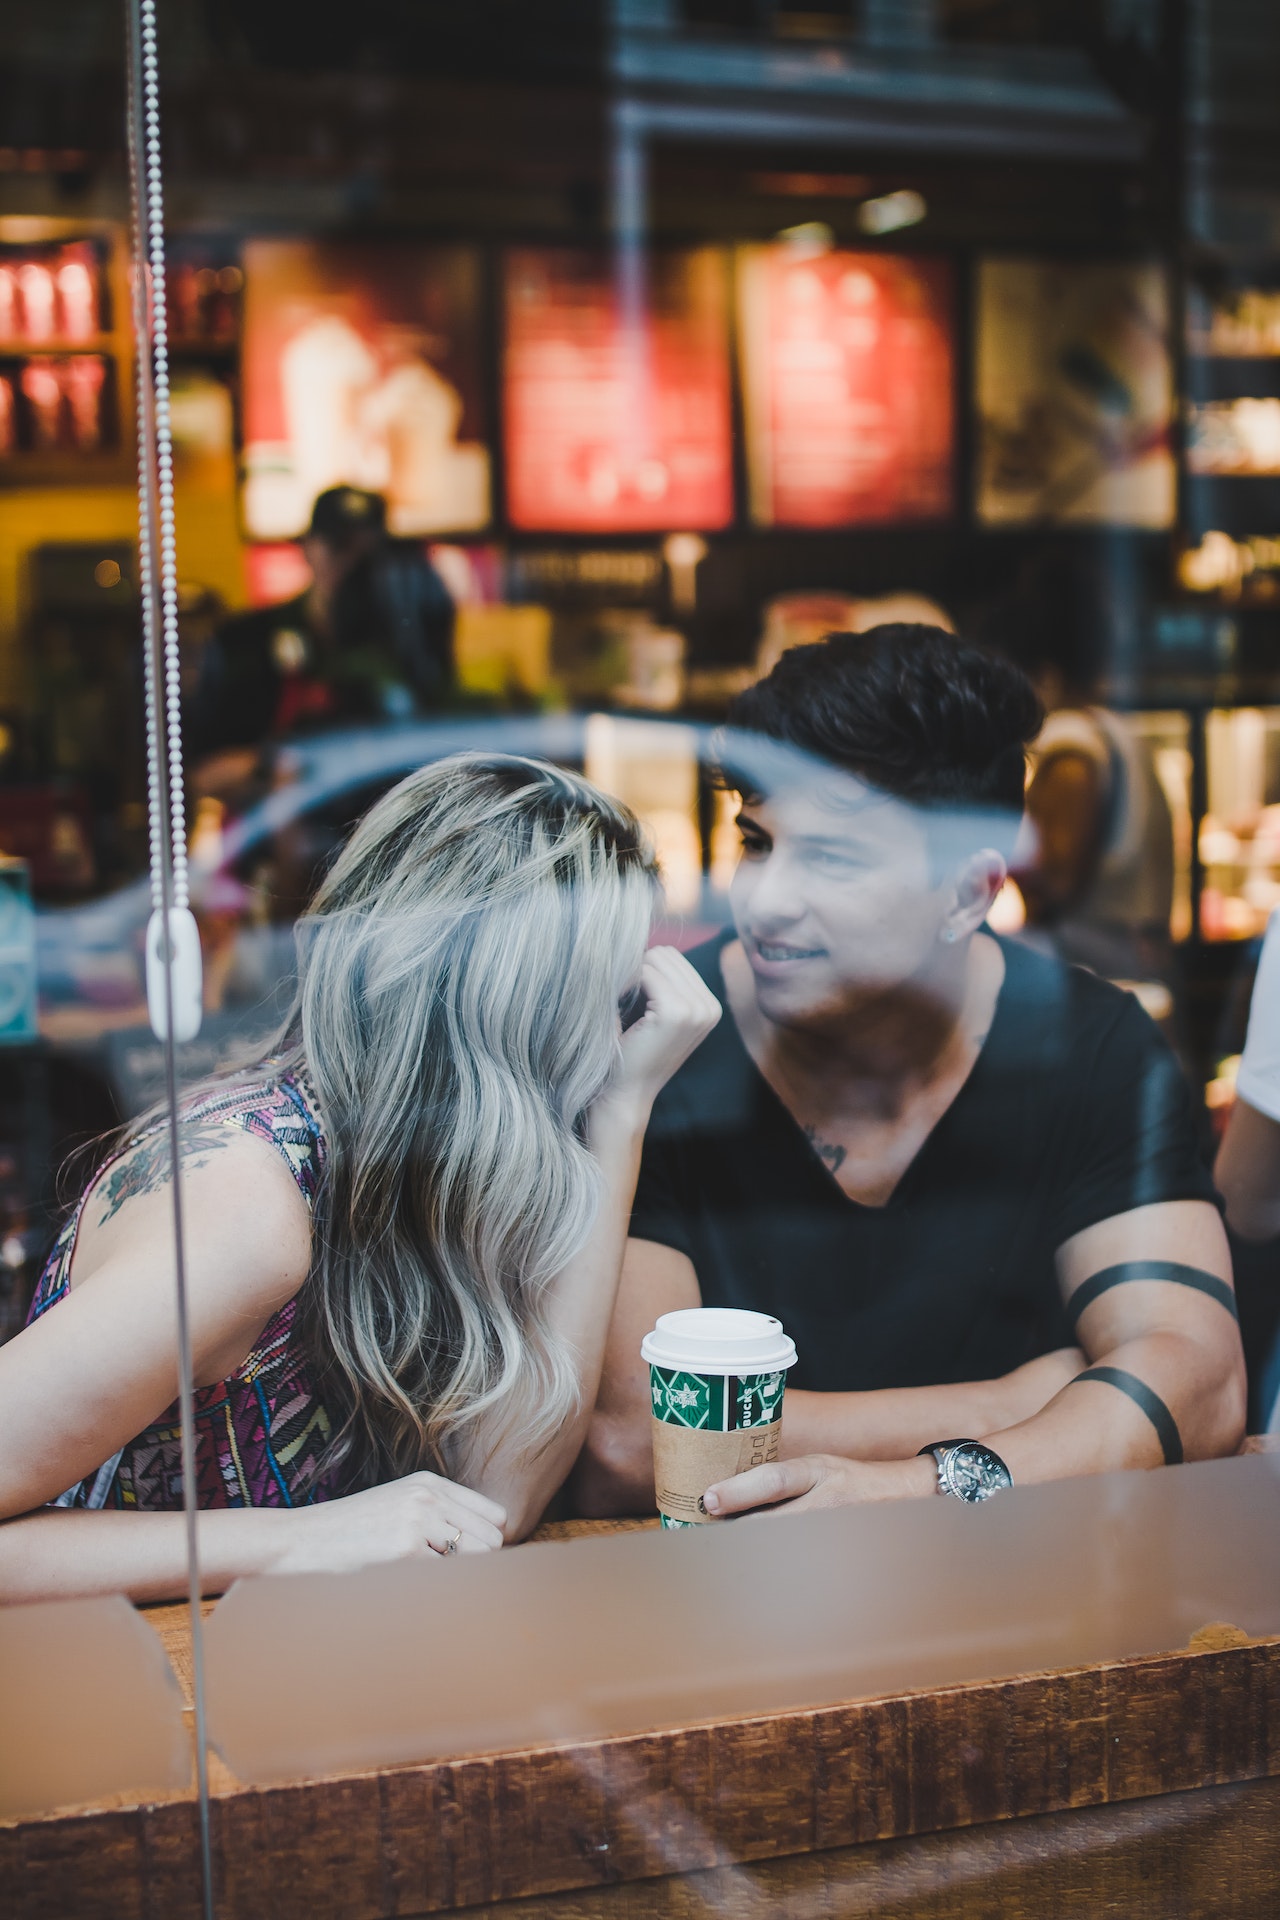 145 Fun Questions for Couples to Ask to Deepen Their Relationship